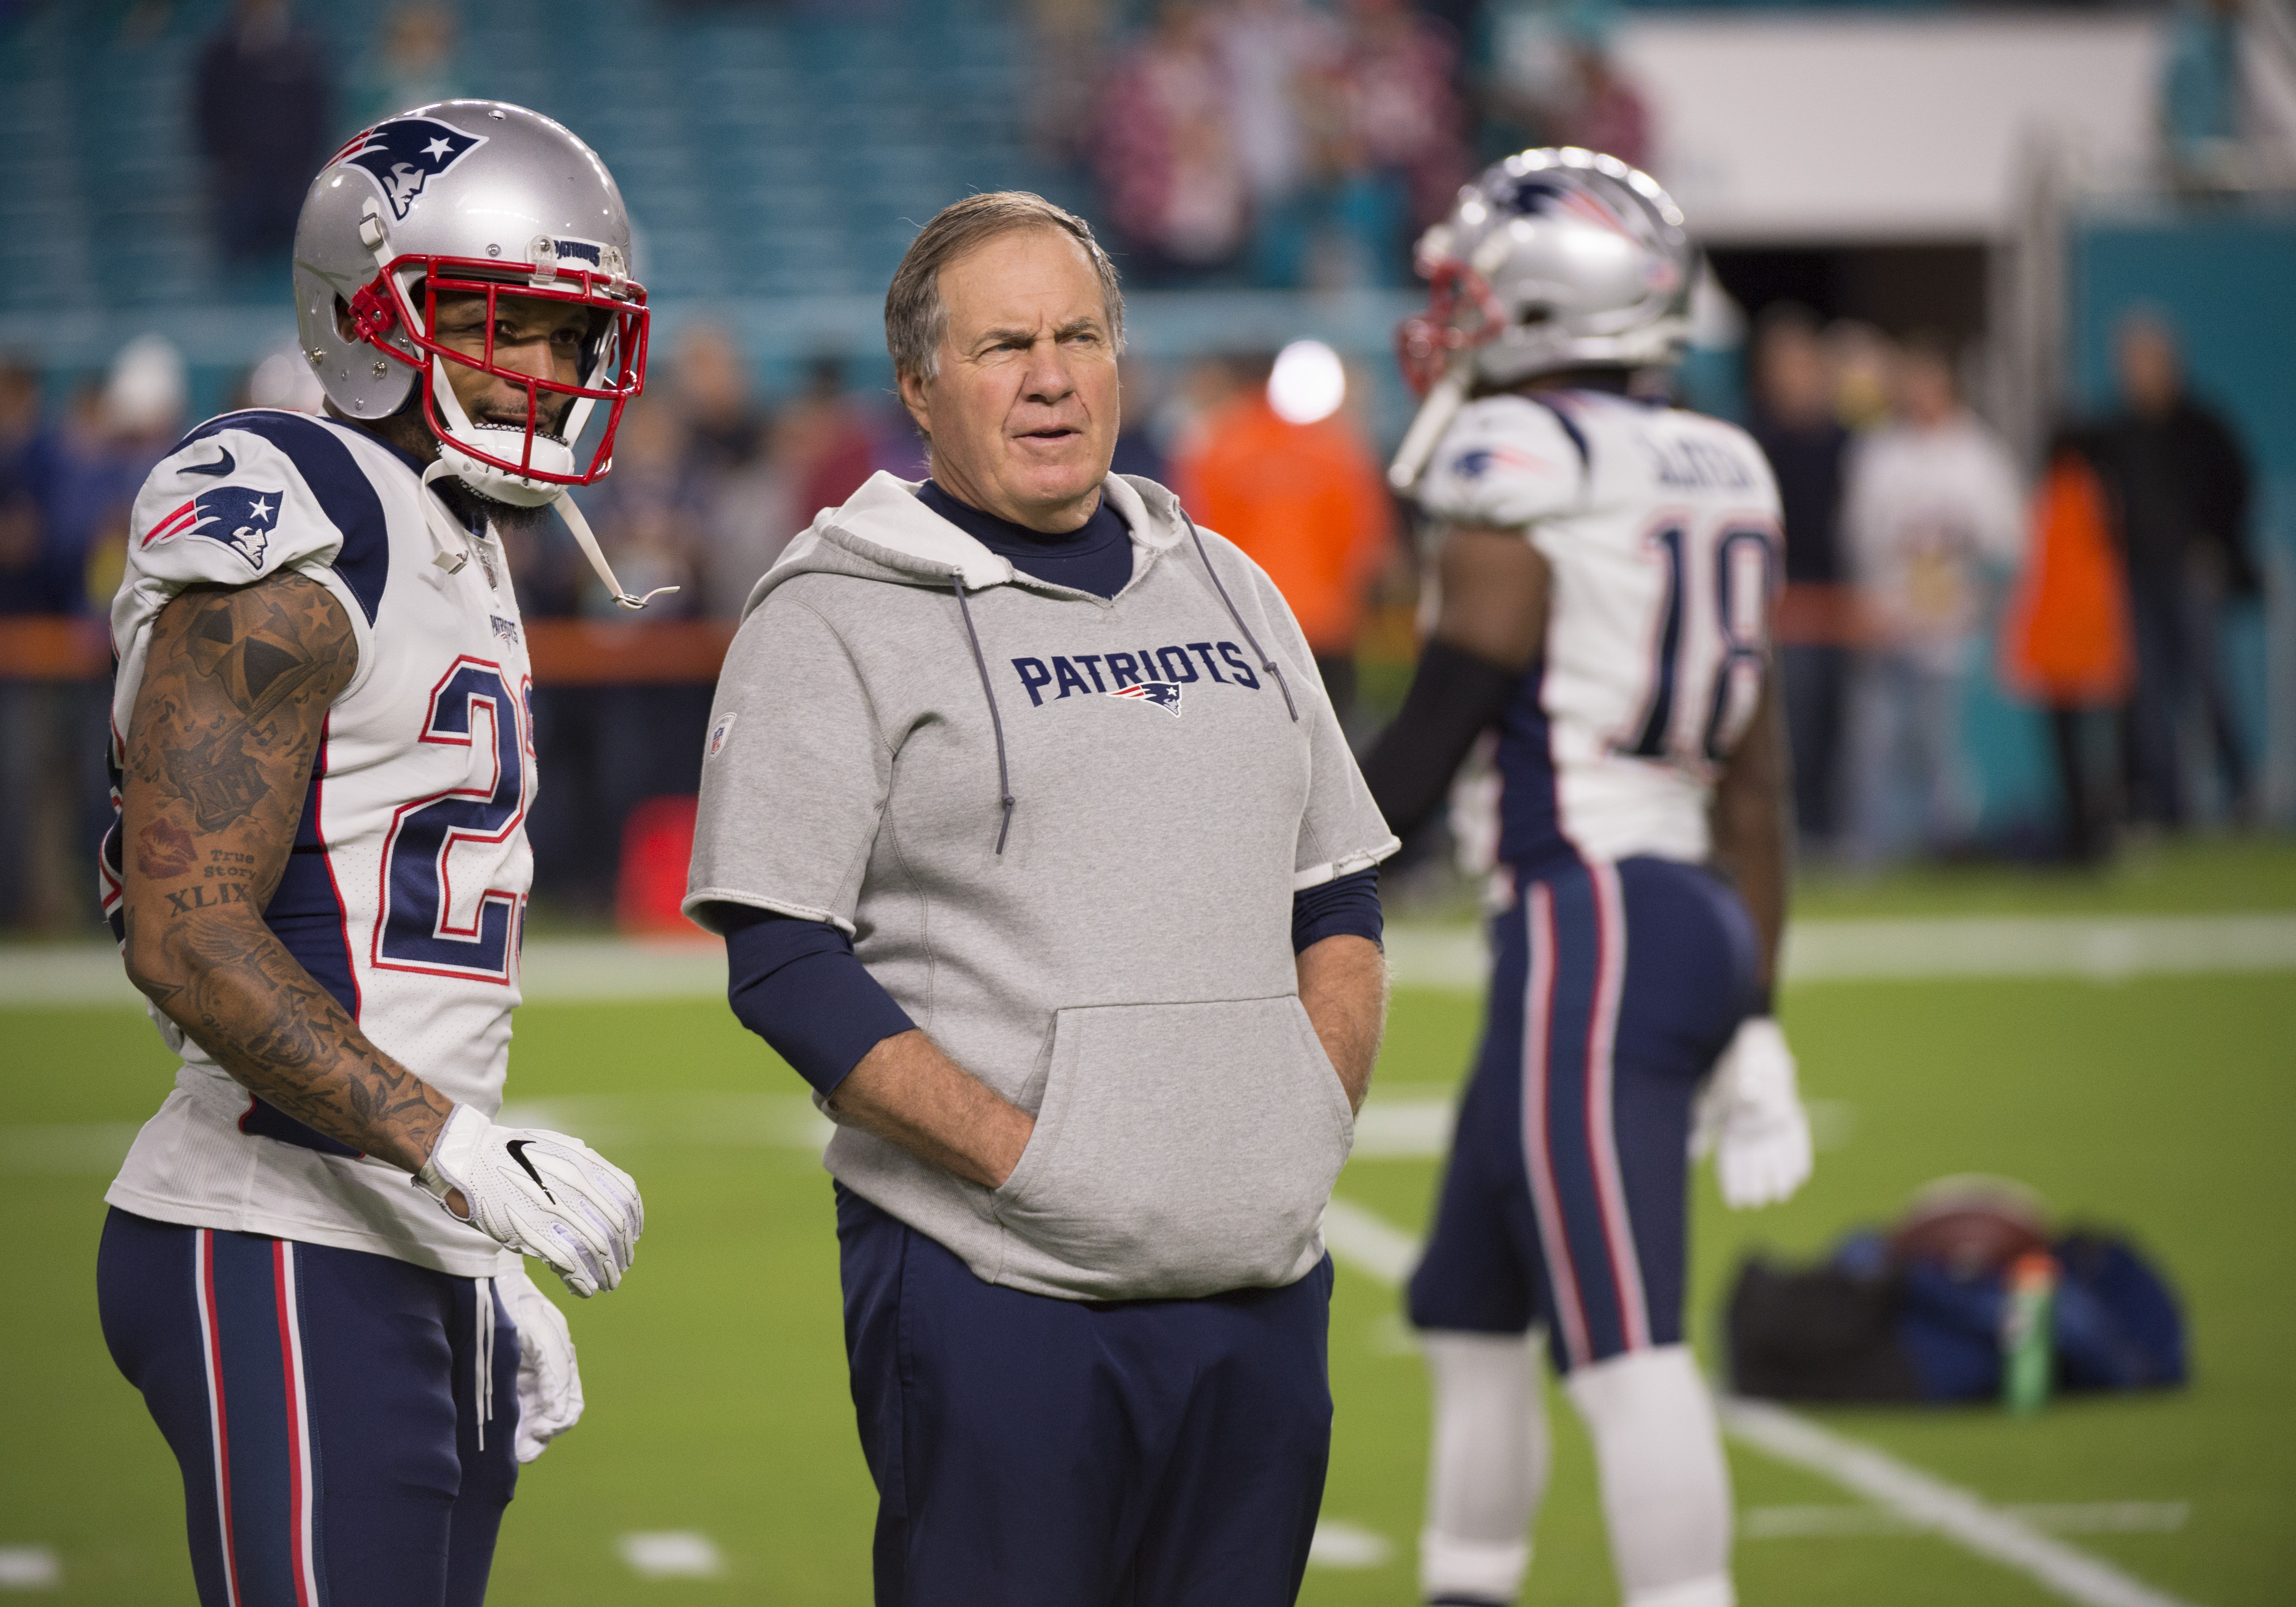 New England head coach Bill Belichick and Patriots safety Patrick Chung talk on the field in 2017. (Doug Murray/Icon Sportswire via Getty)